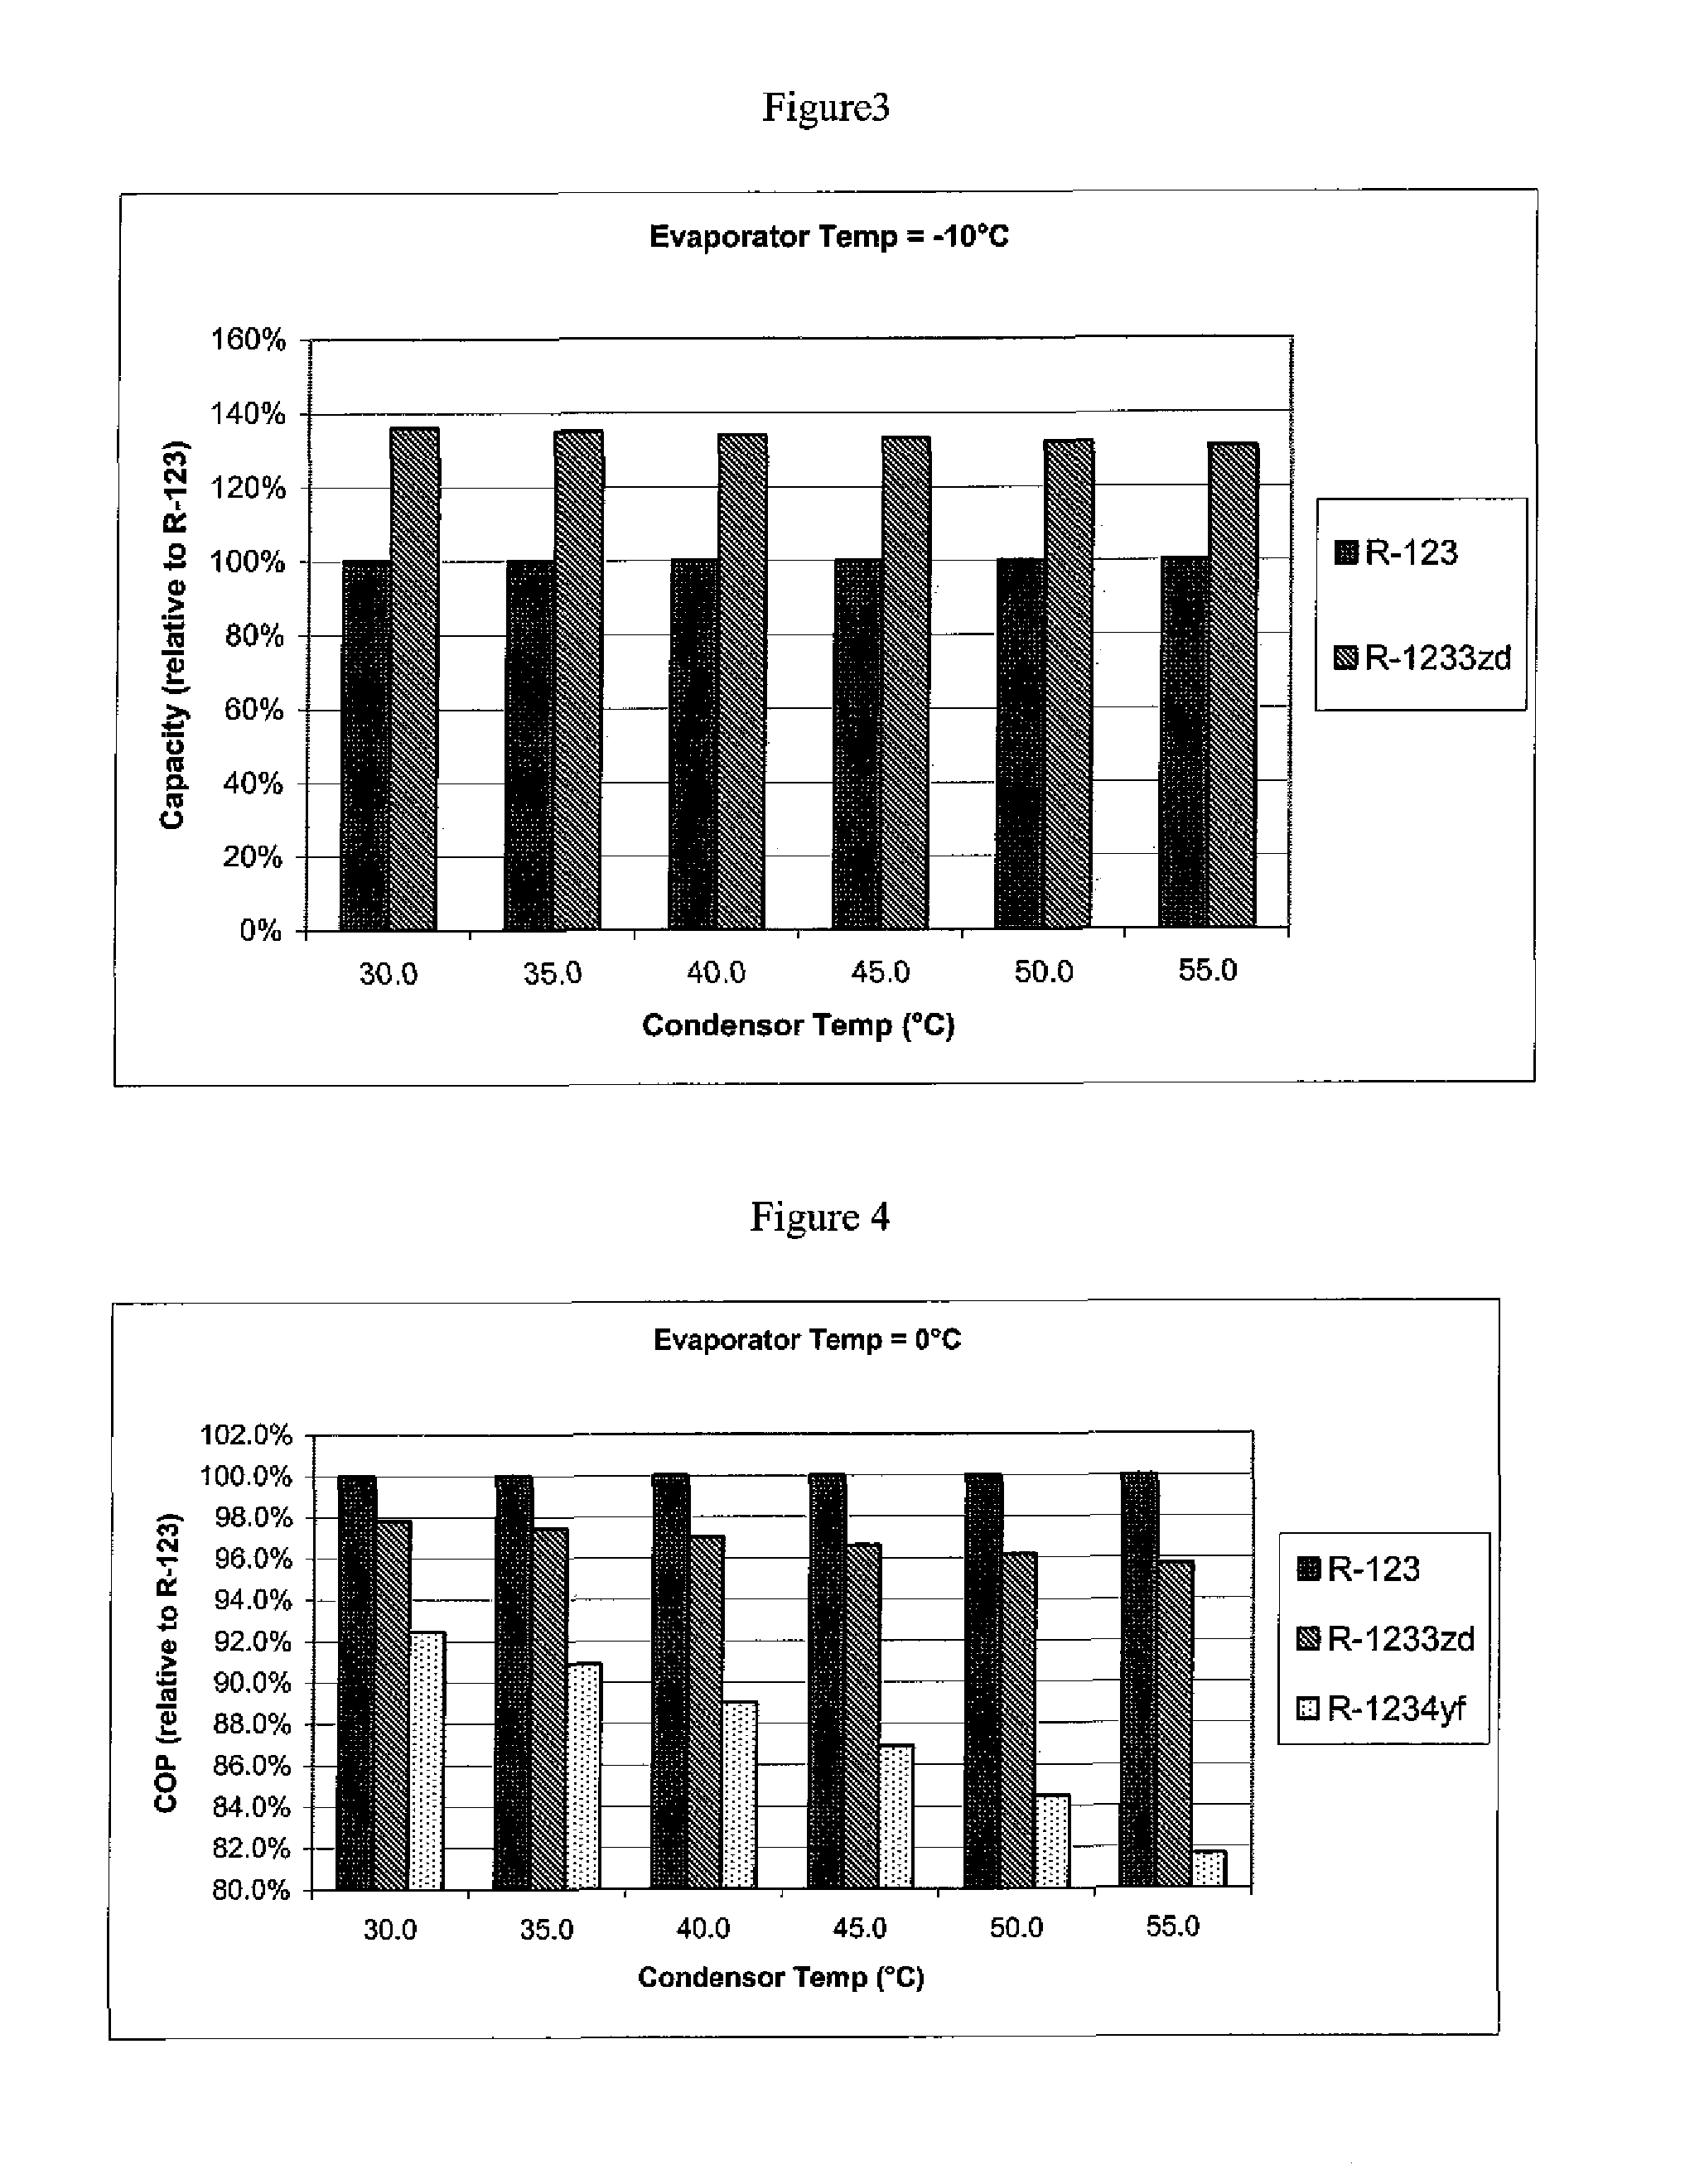 Use of r-1233 in liquid chillers